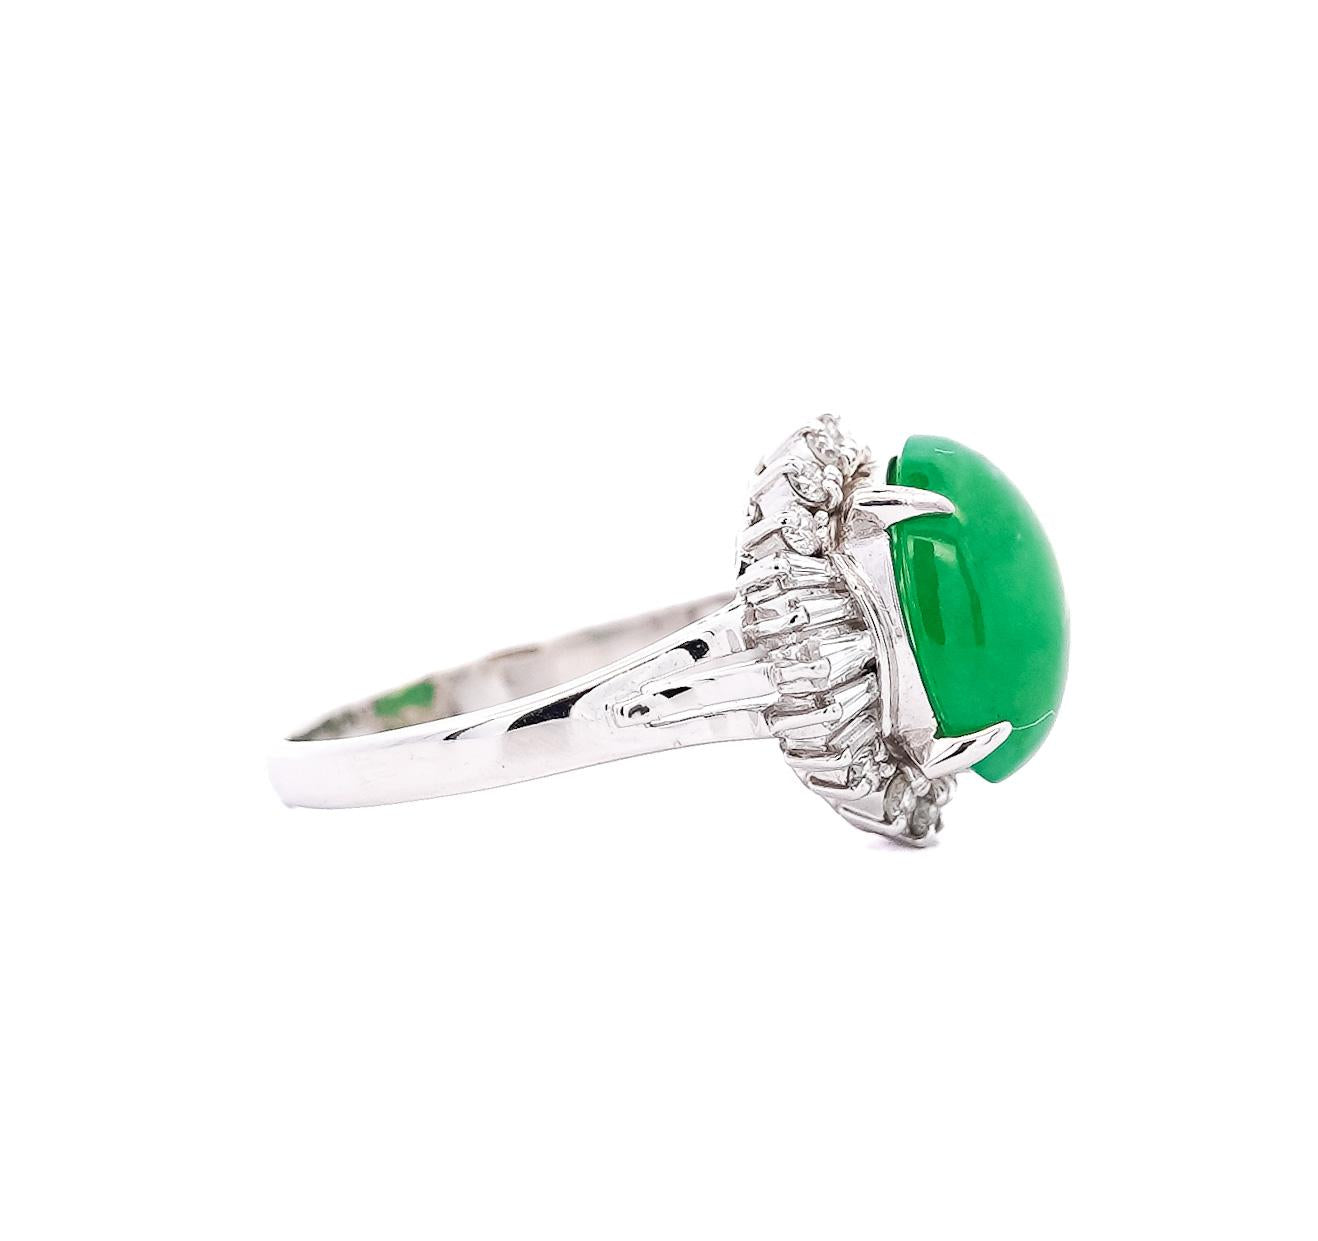 Certified 5.16 Carat Fei Cui Type A Jadeite Jade and Diamond Cocktail Ring